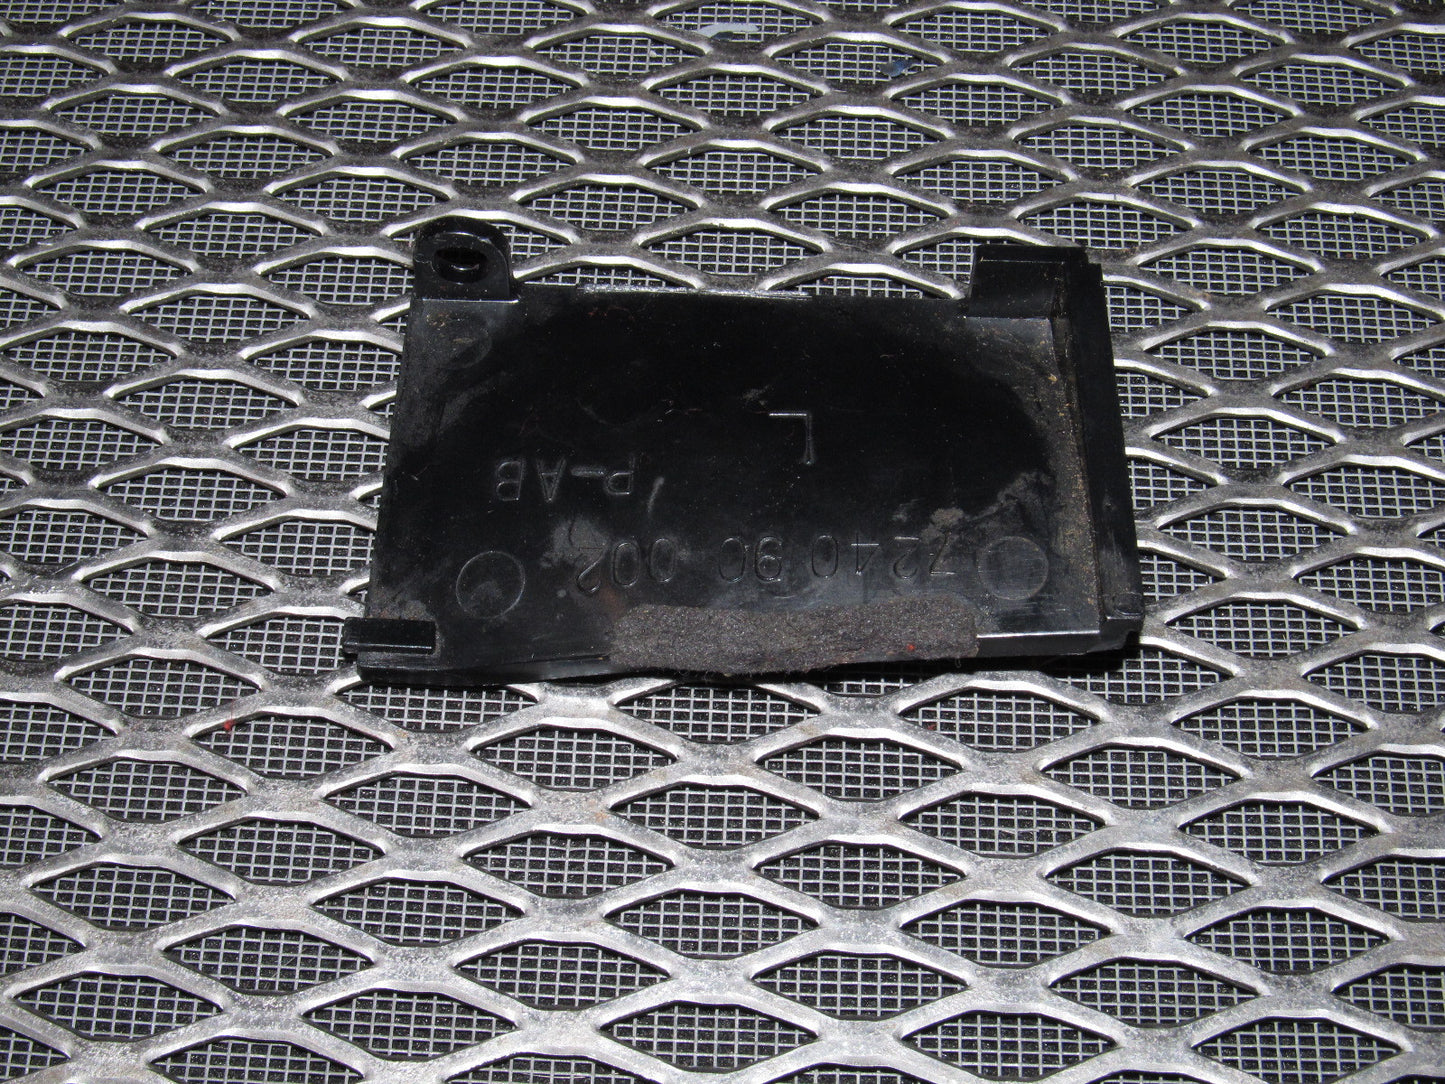 86 87 88 Mazda RX7 OEM Cruise Control Switch Lower Cover